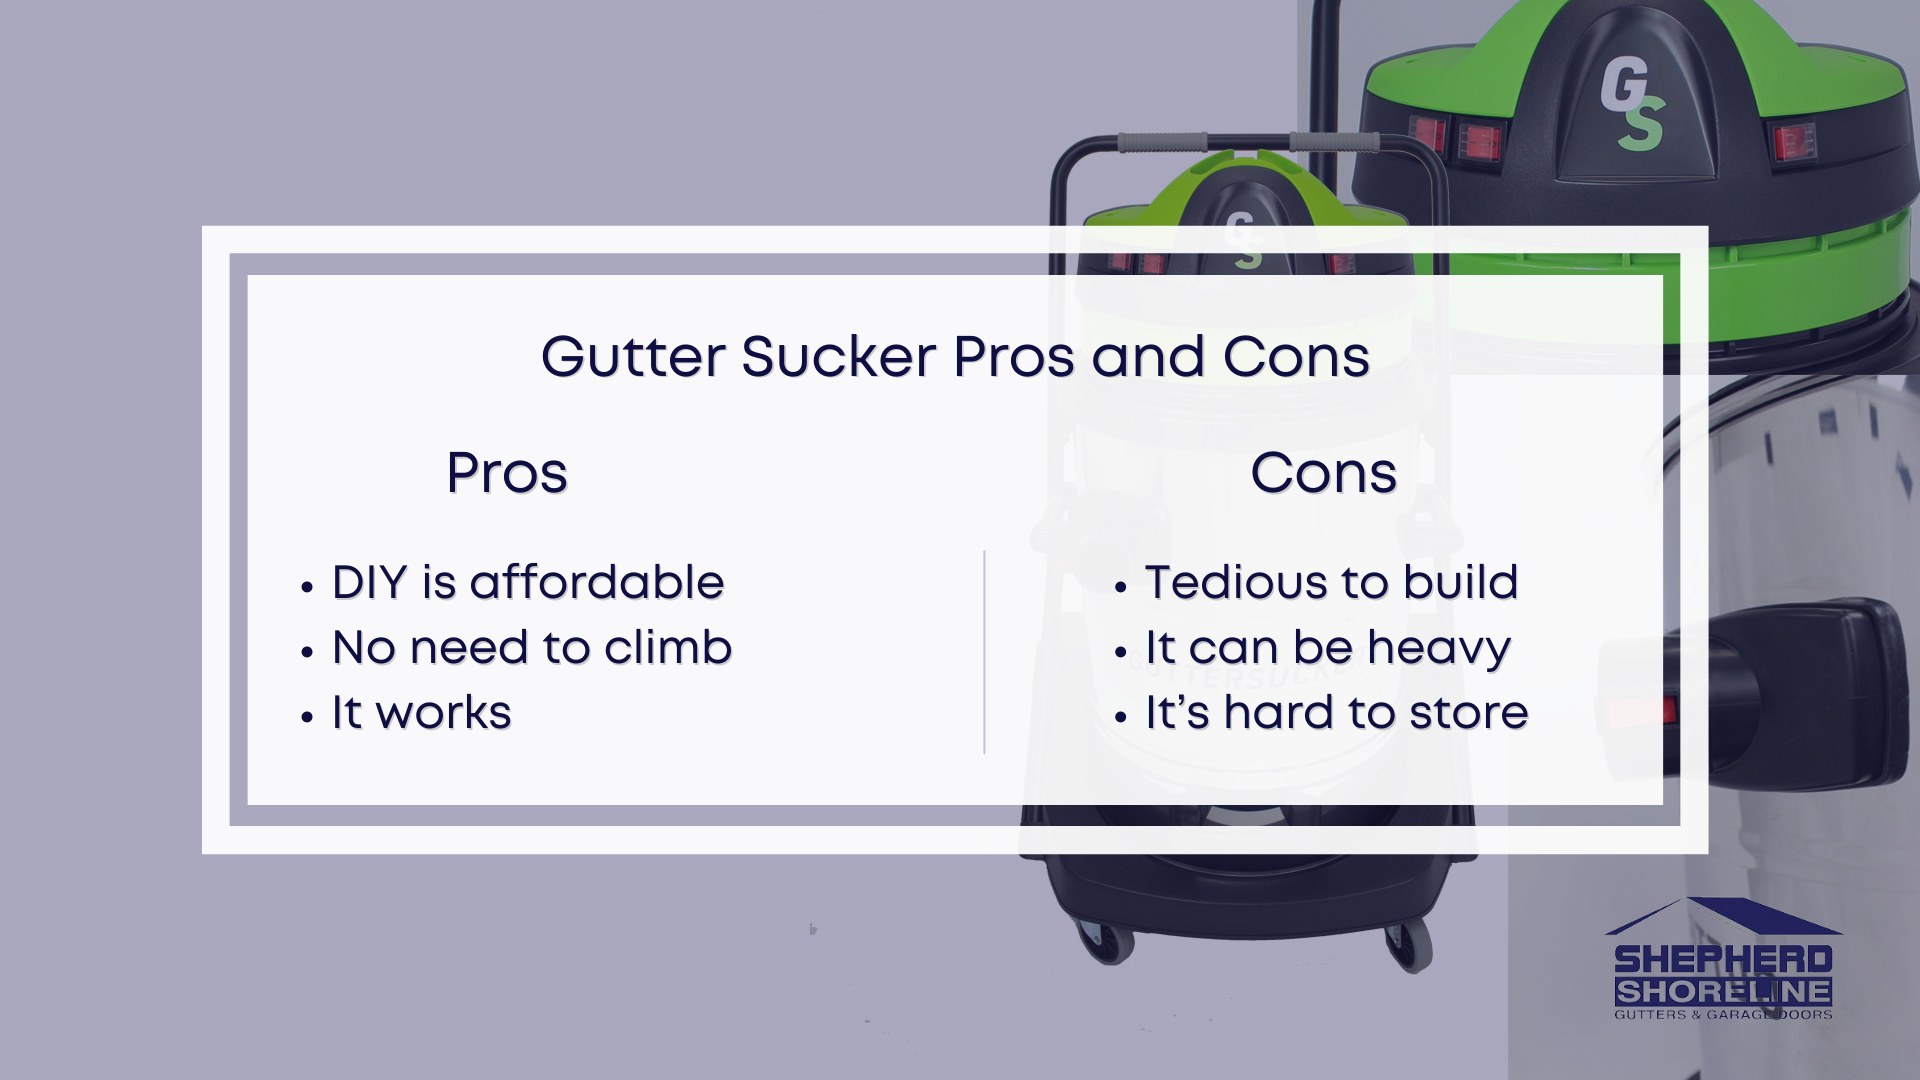 Infographic of the pros and cons of gutter suckers